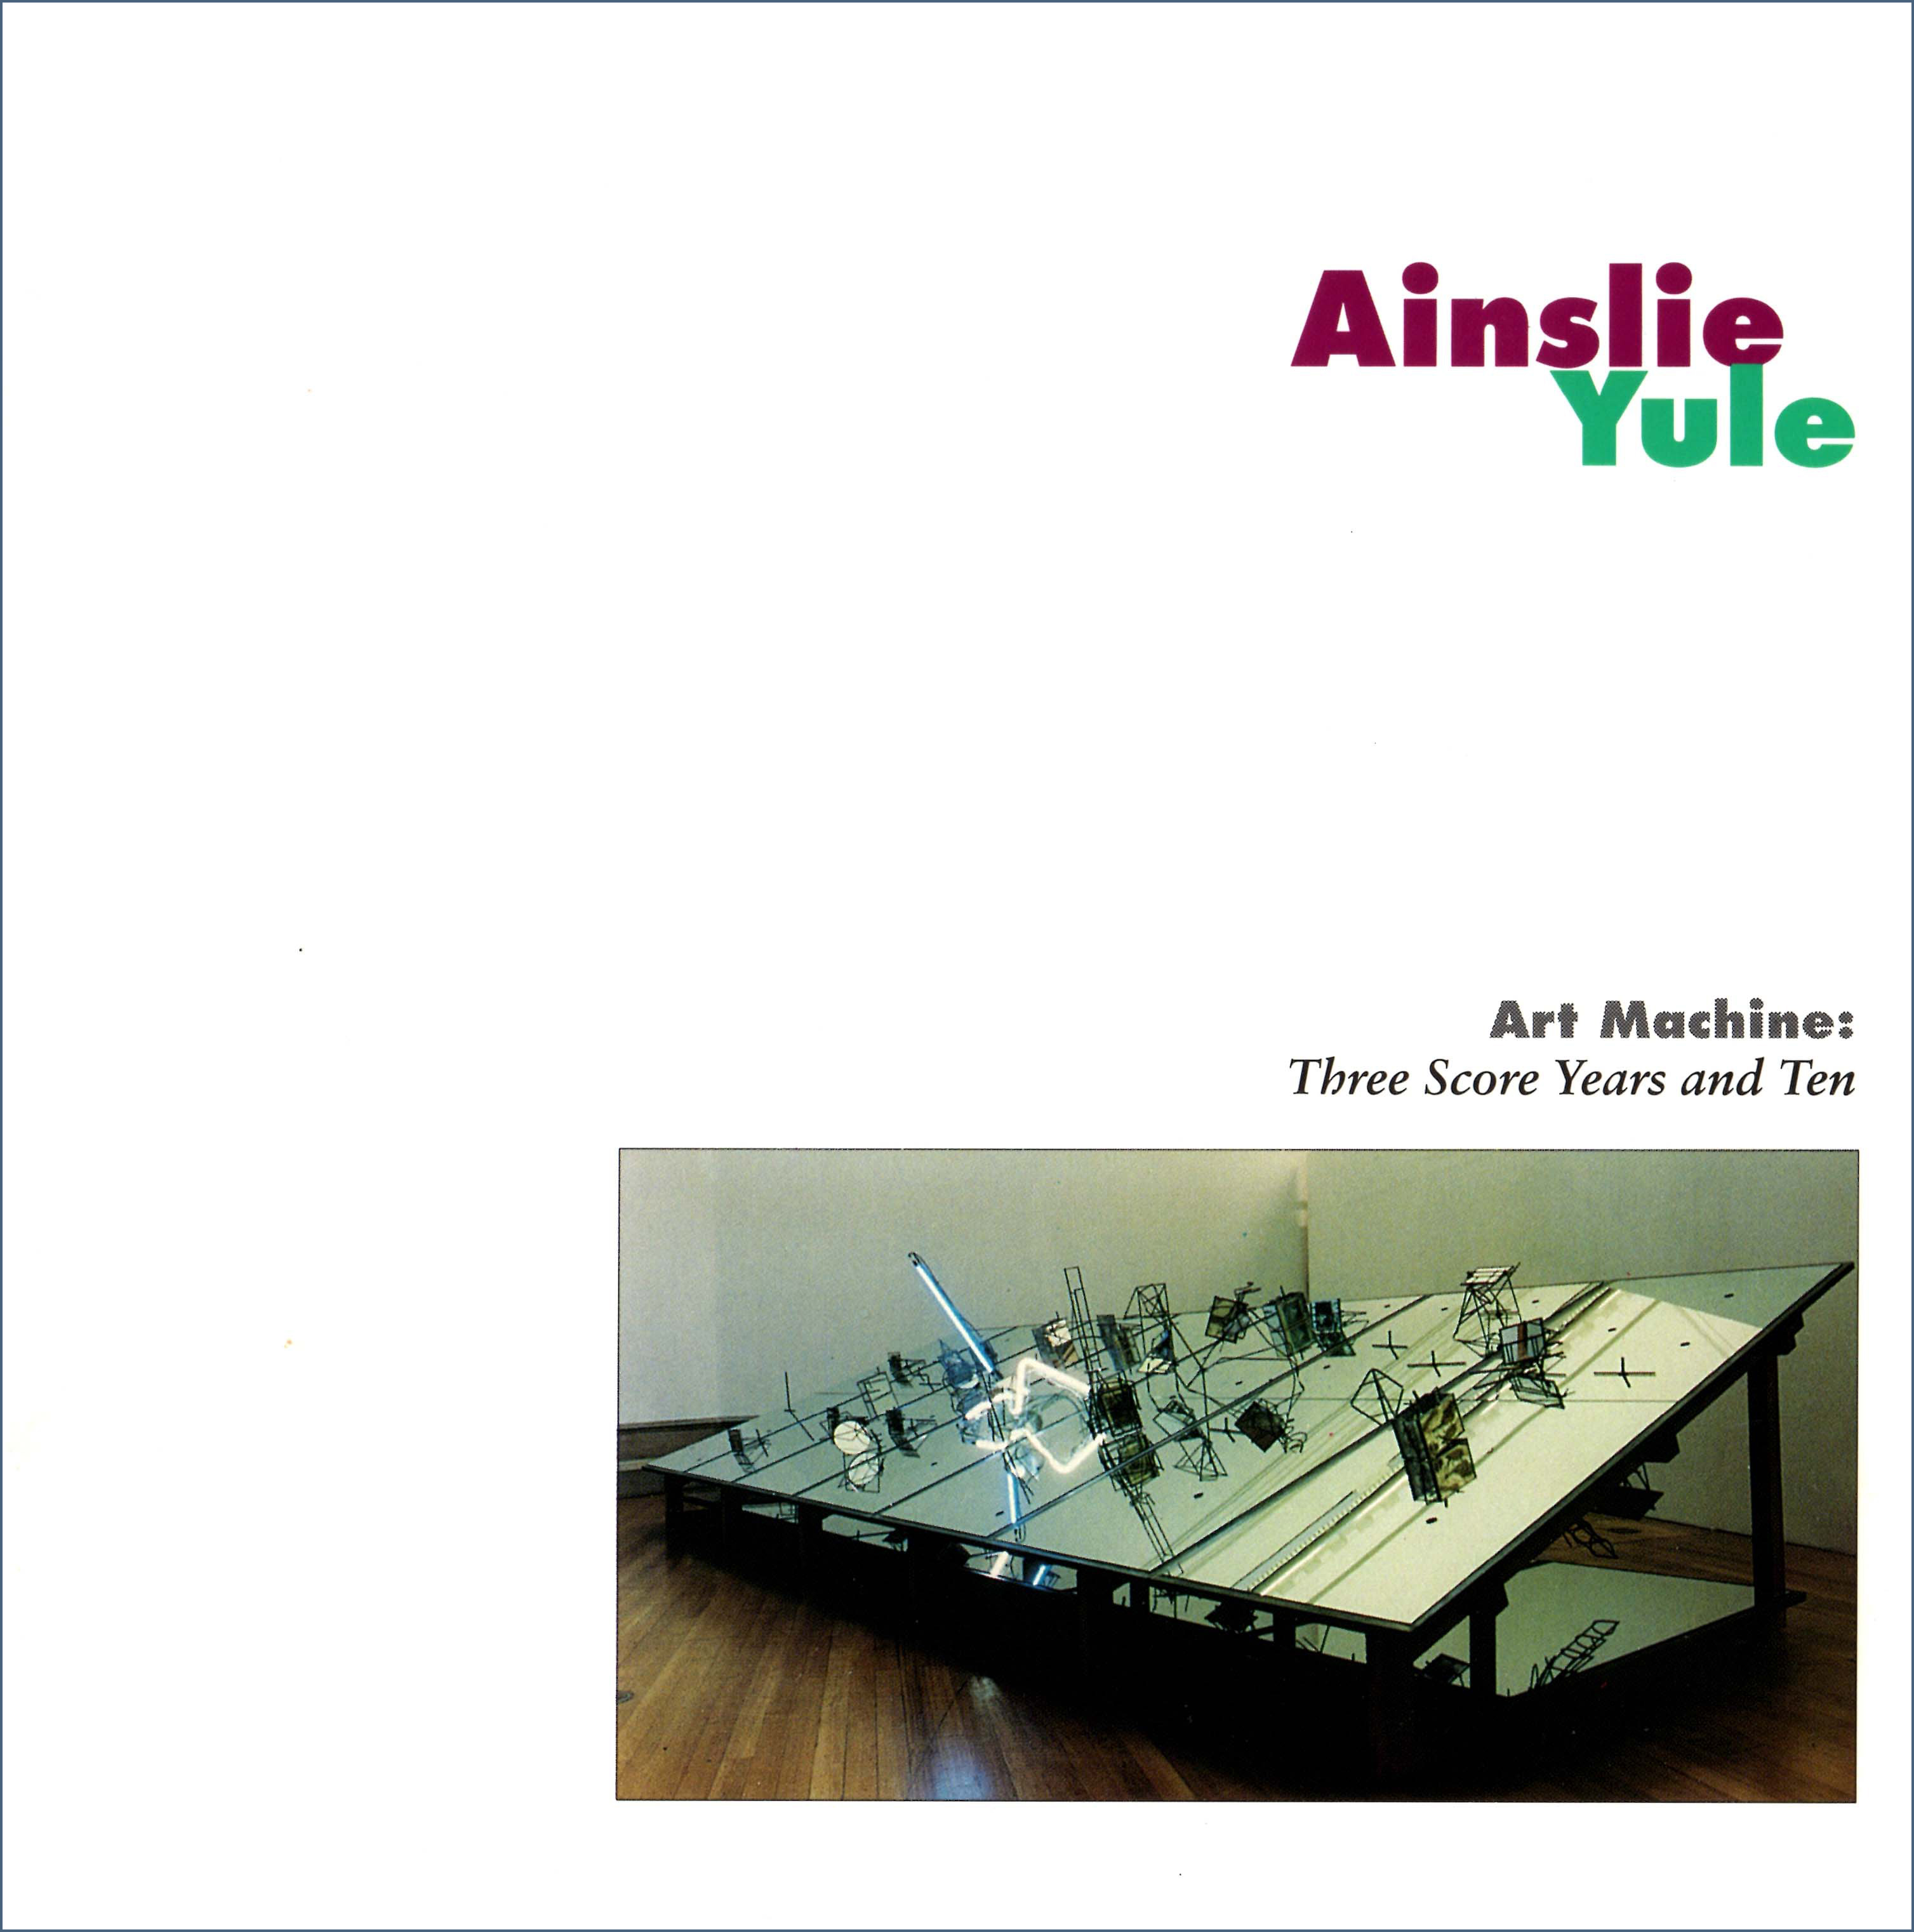 Front cover of the Art Machine Three Score Years and Ten publication